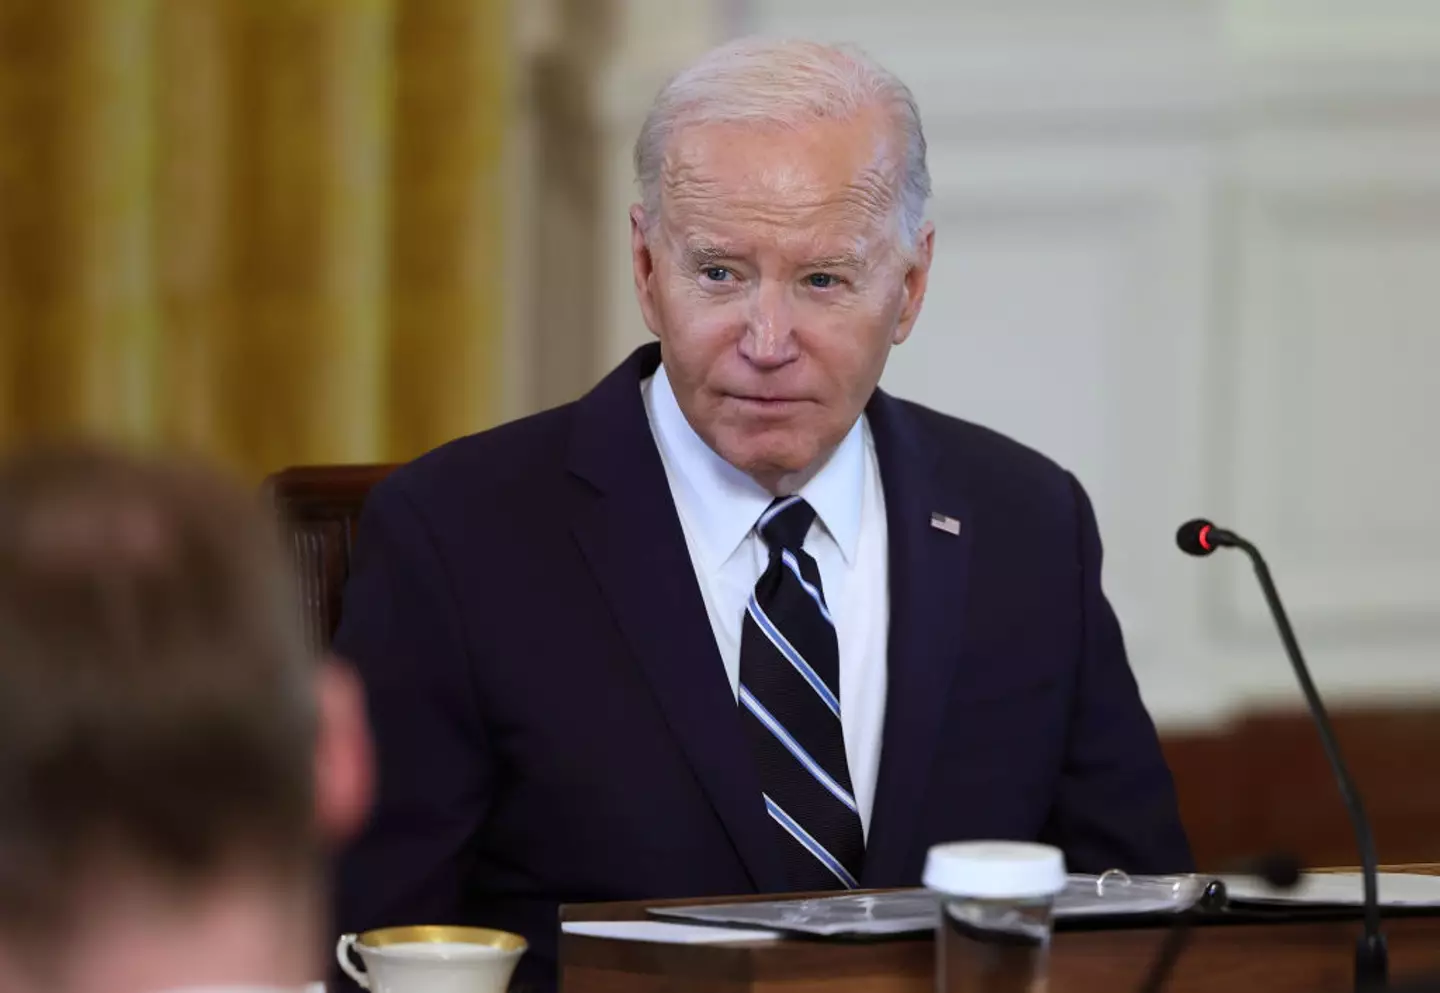 Joe Biden is hoping for a second term in the White House.